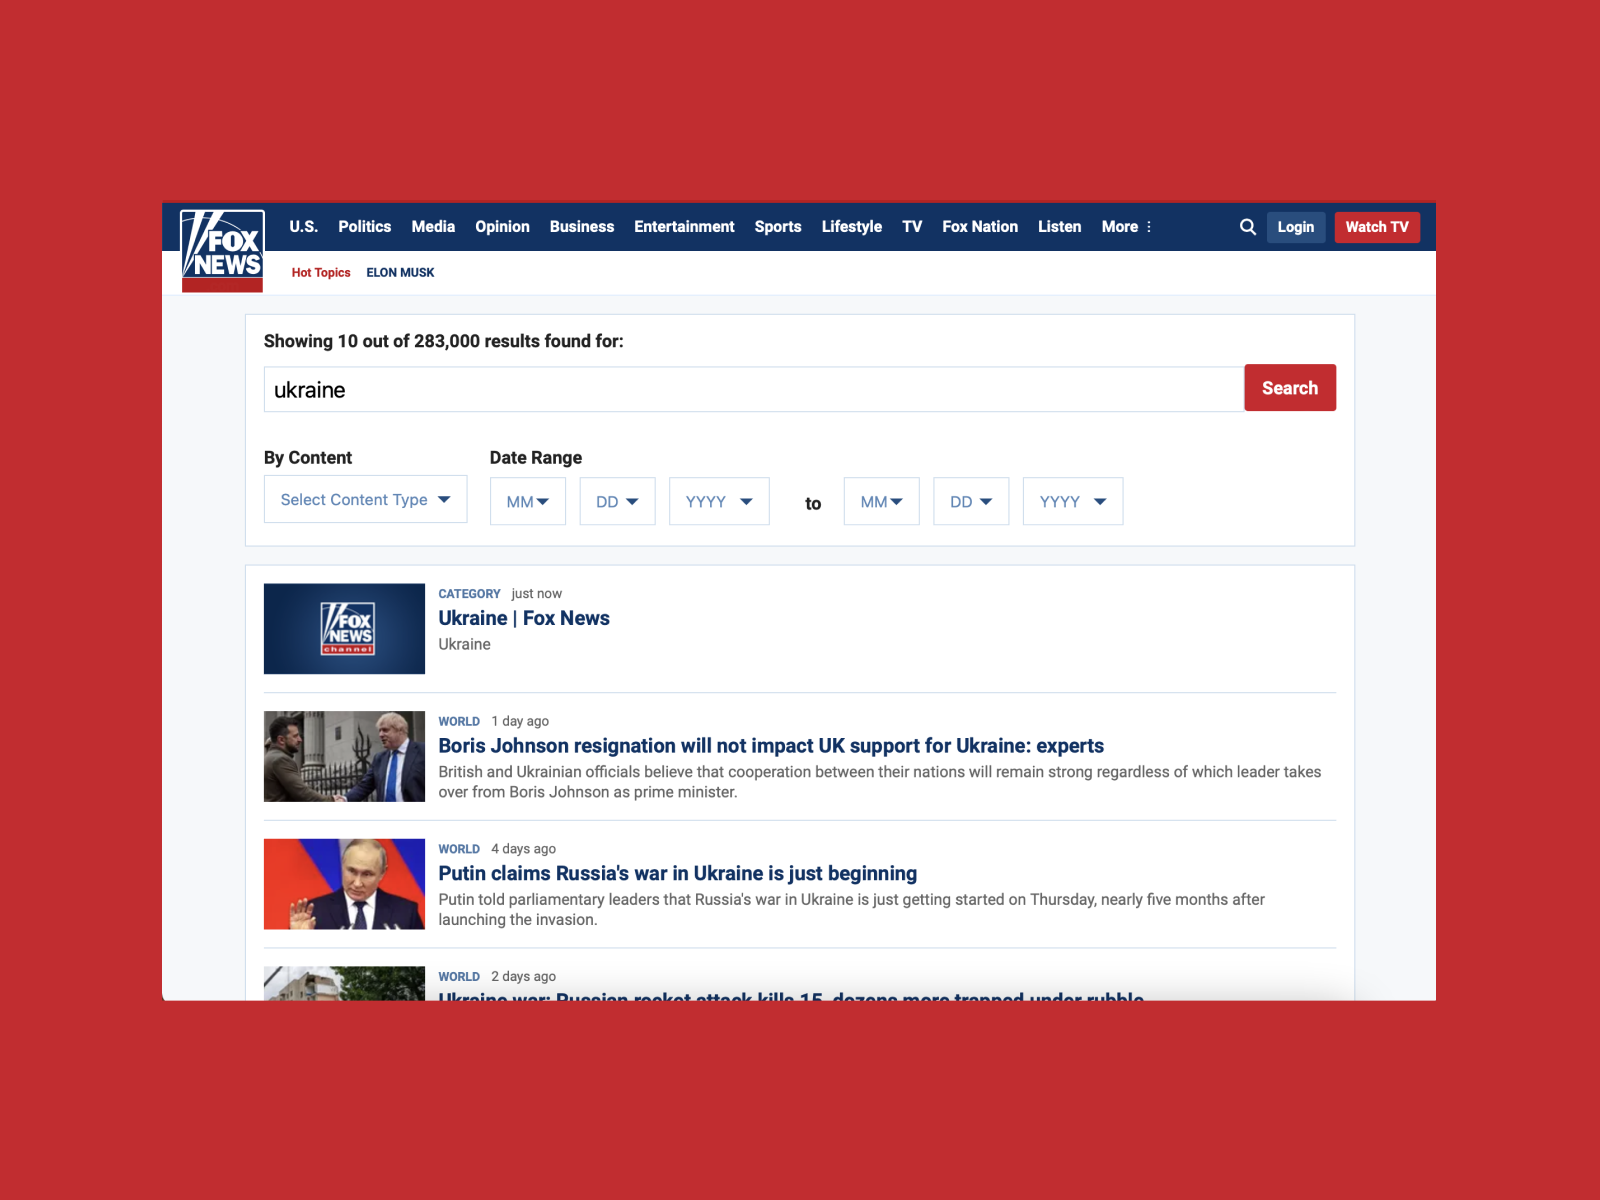 Example of Fox News`s search functionality